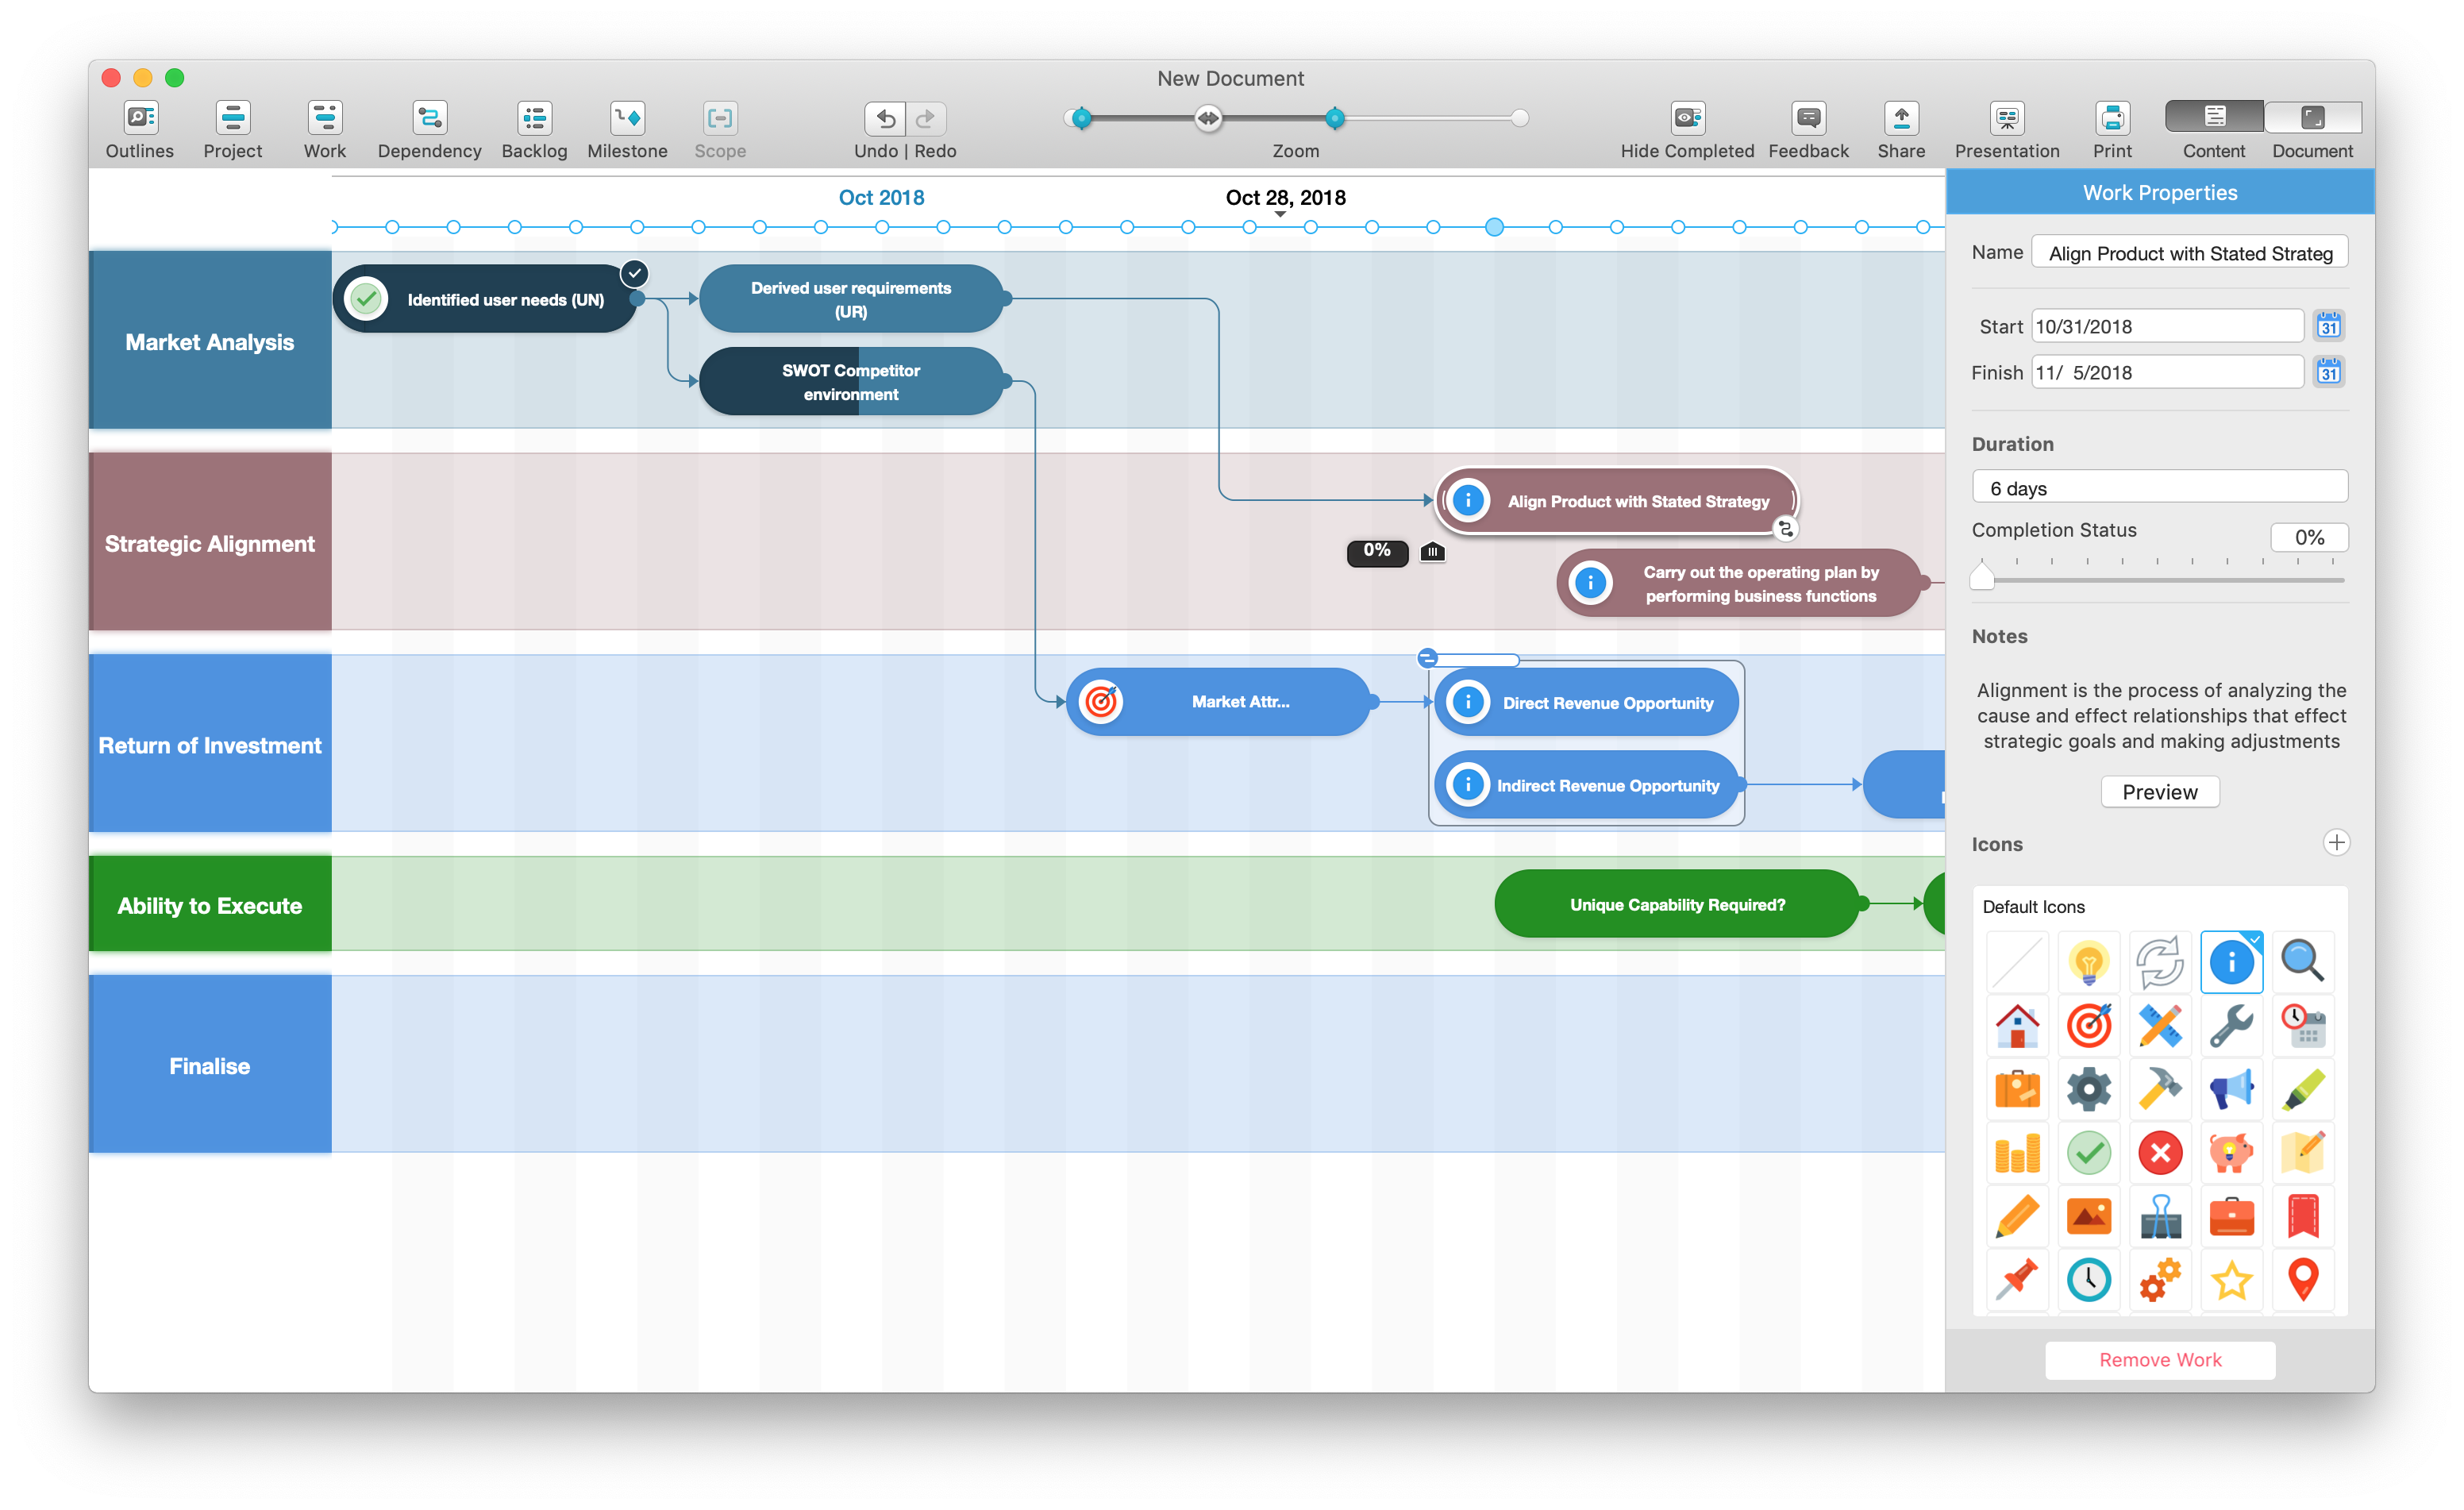 roadmap planner that links to jira tickets